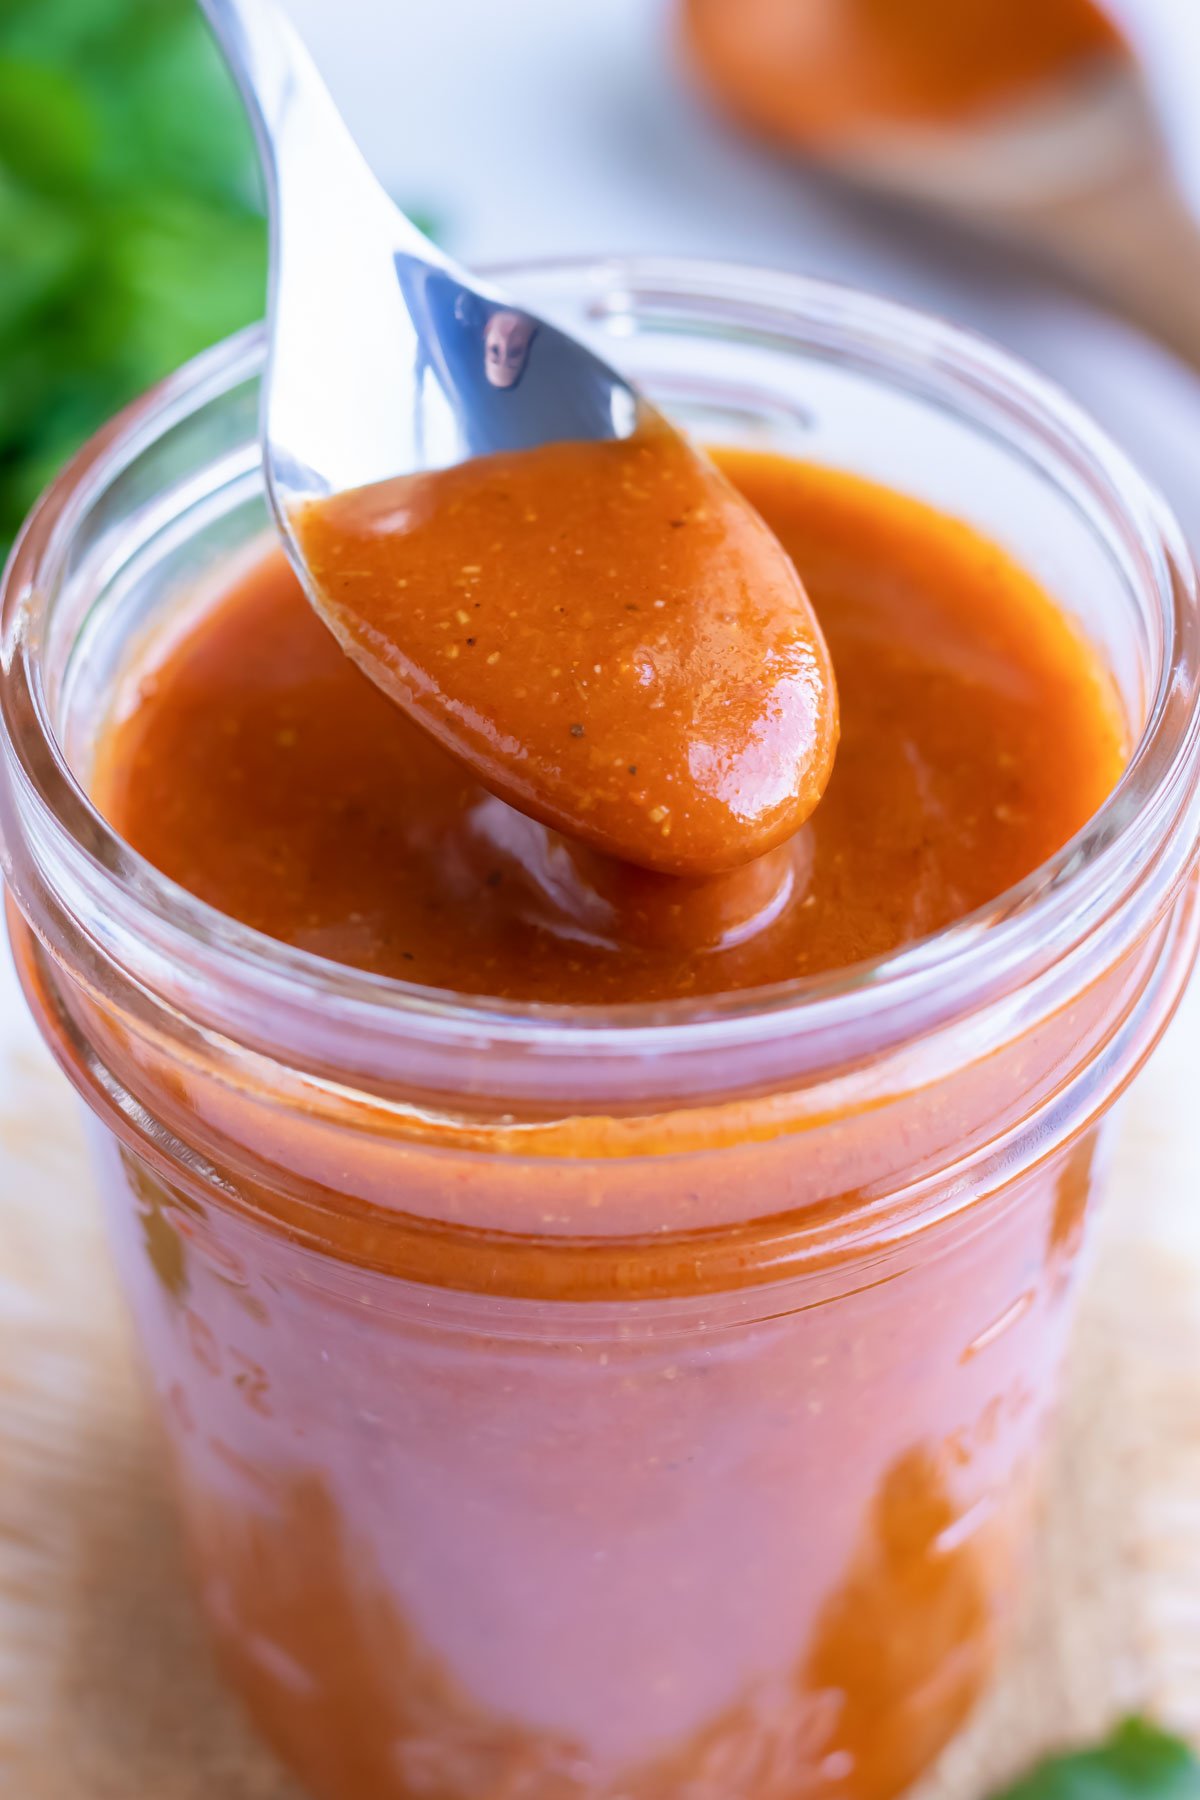 A spoon scooping out some red sauce from a glass storage jar.